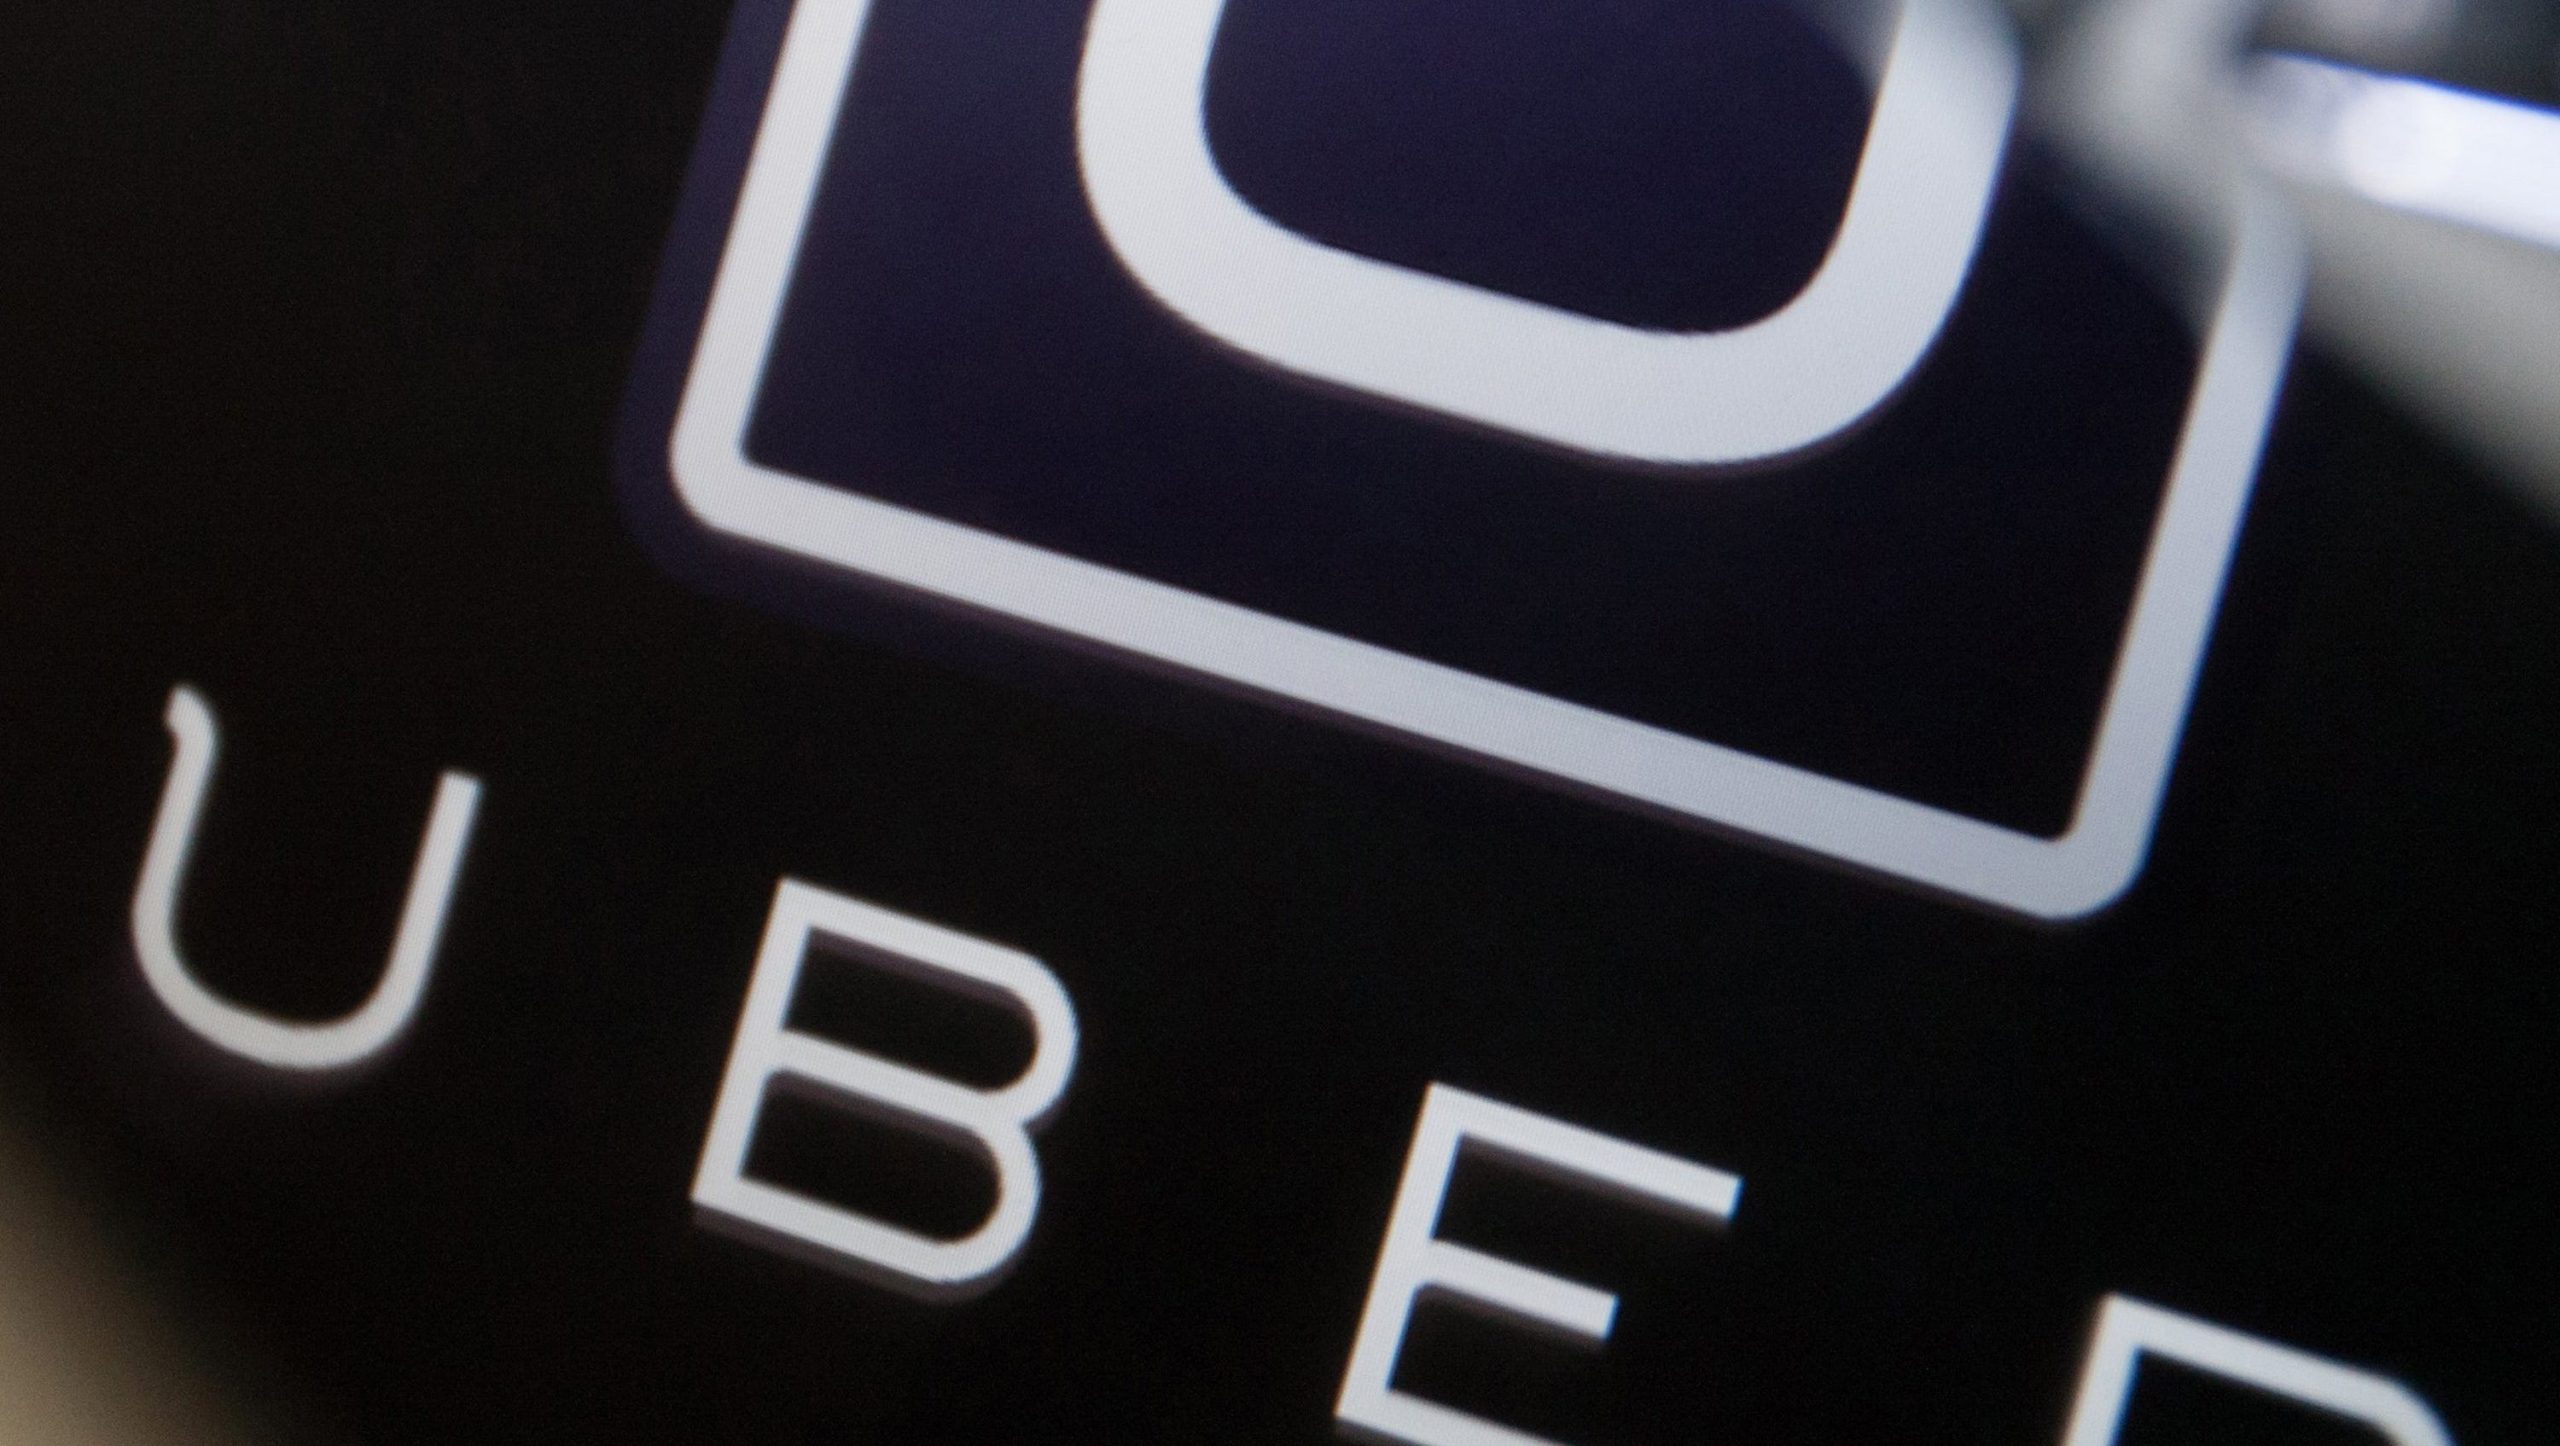 Kitchen, bedroom and bathroom retailers risk being hit by wave of employment tribunals following Uber ruling, warns trade institute @officialbikbbi